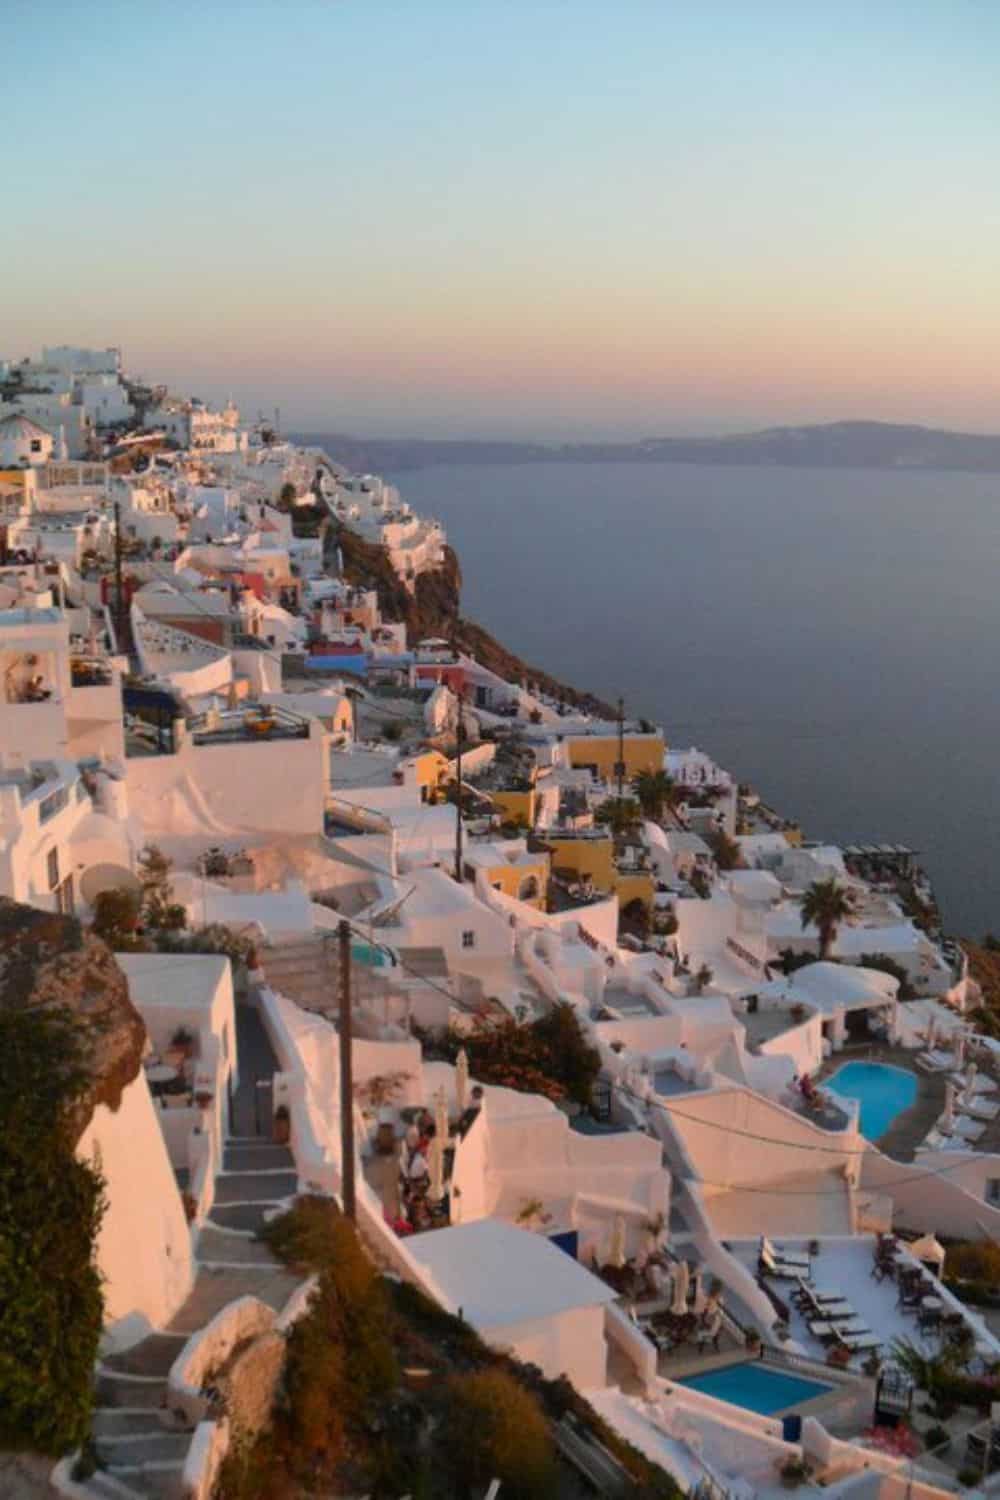 Twilight over Santorini: A cascade of traditional white Cycladic houses with blue accents descends the cliffside toward the Aegean Sea, with the sky softly transitioning from pink to blue at dusk.